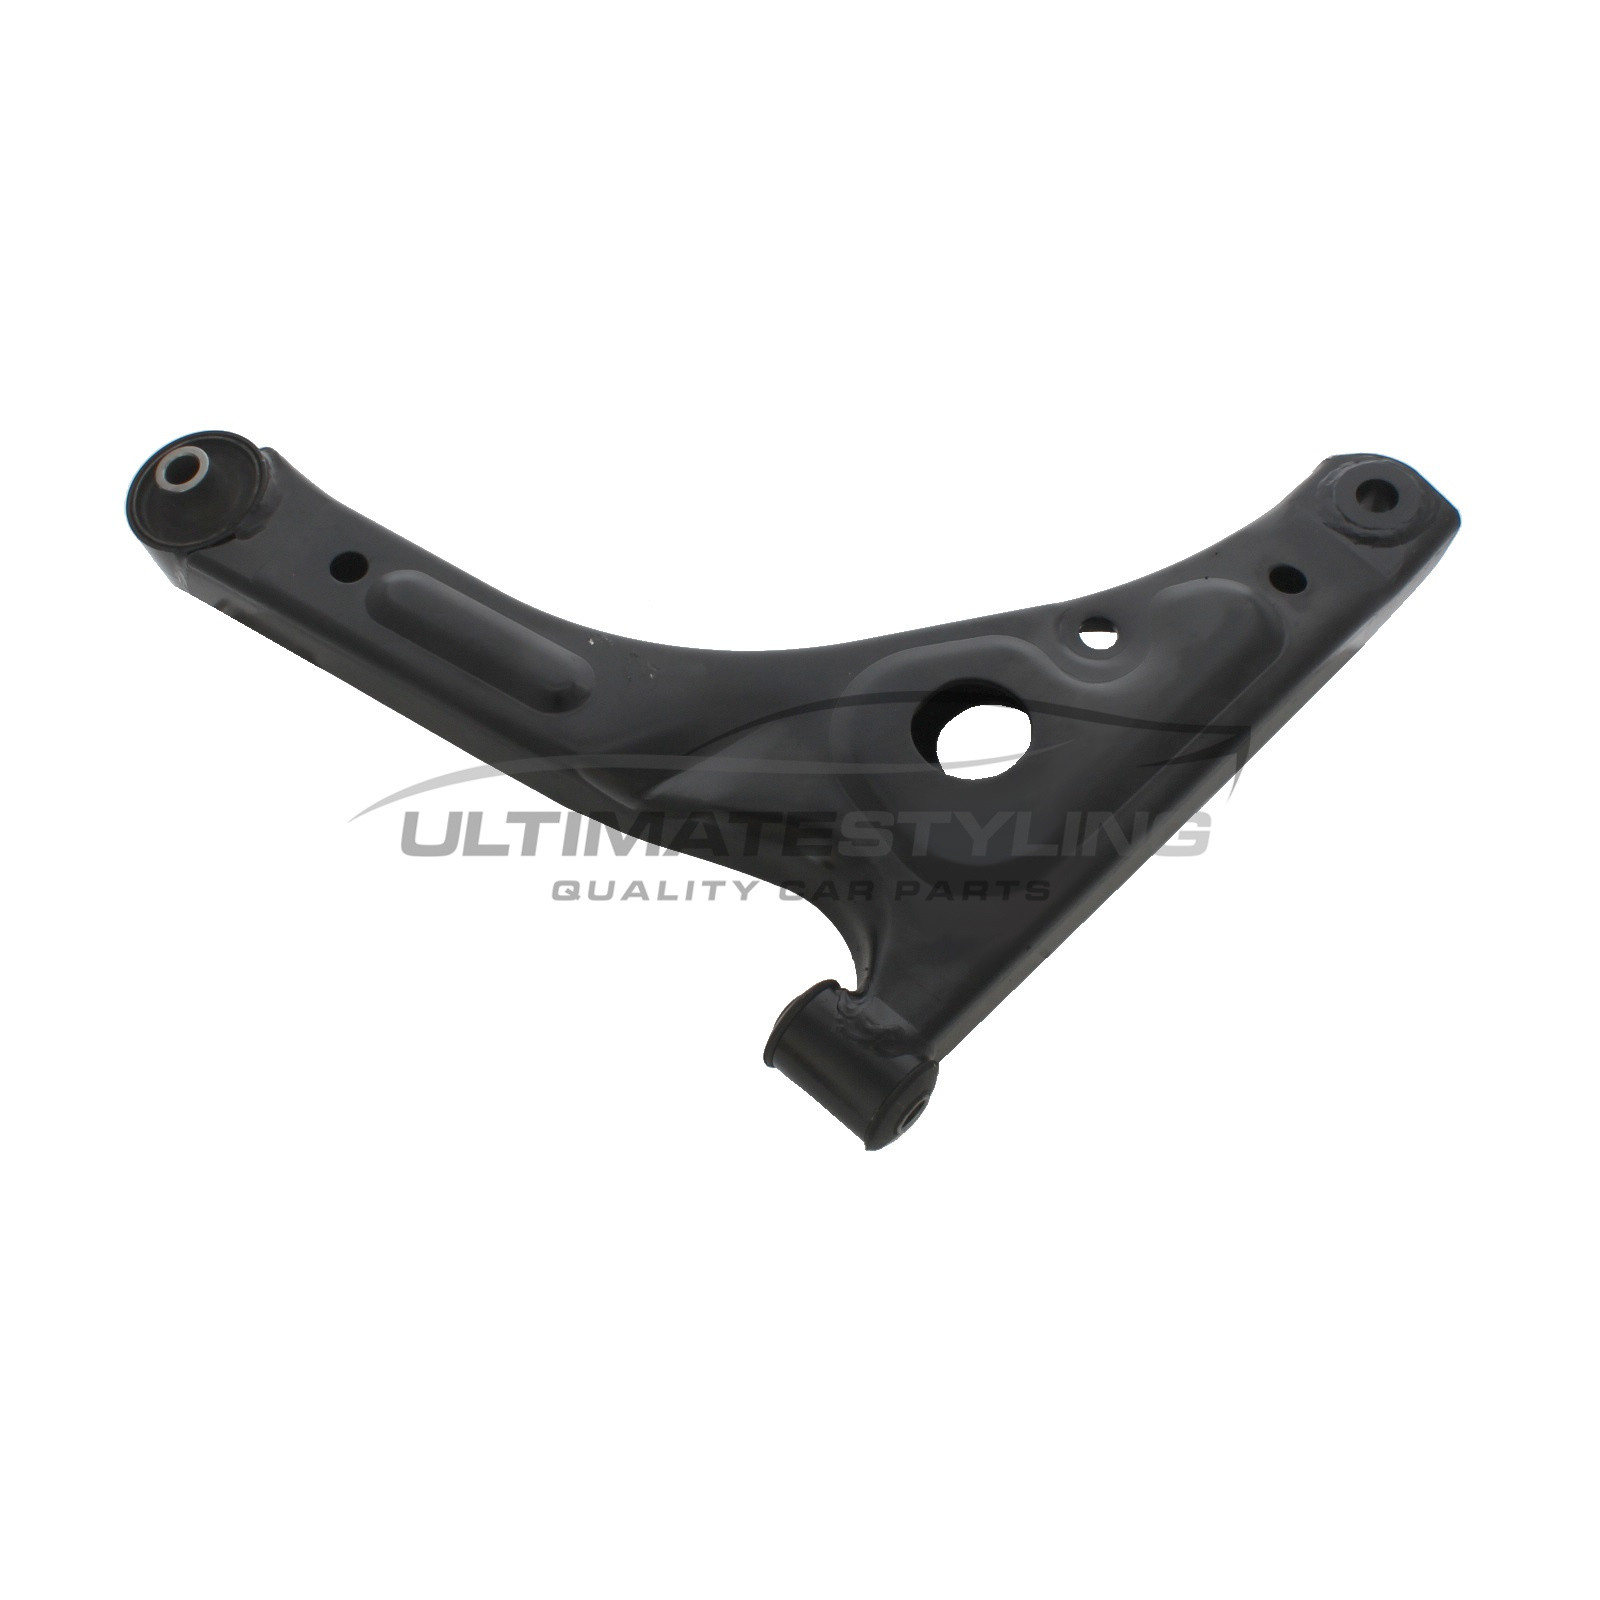 Ford Transit 2000-2014 Front Lower Suspension Arm (Steel) Excluding Ball Joint and Rear Bush Passenger Side (LH)